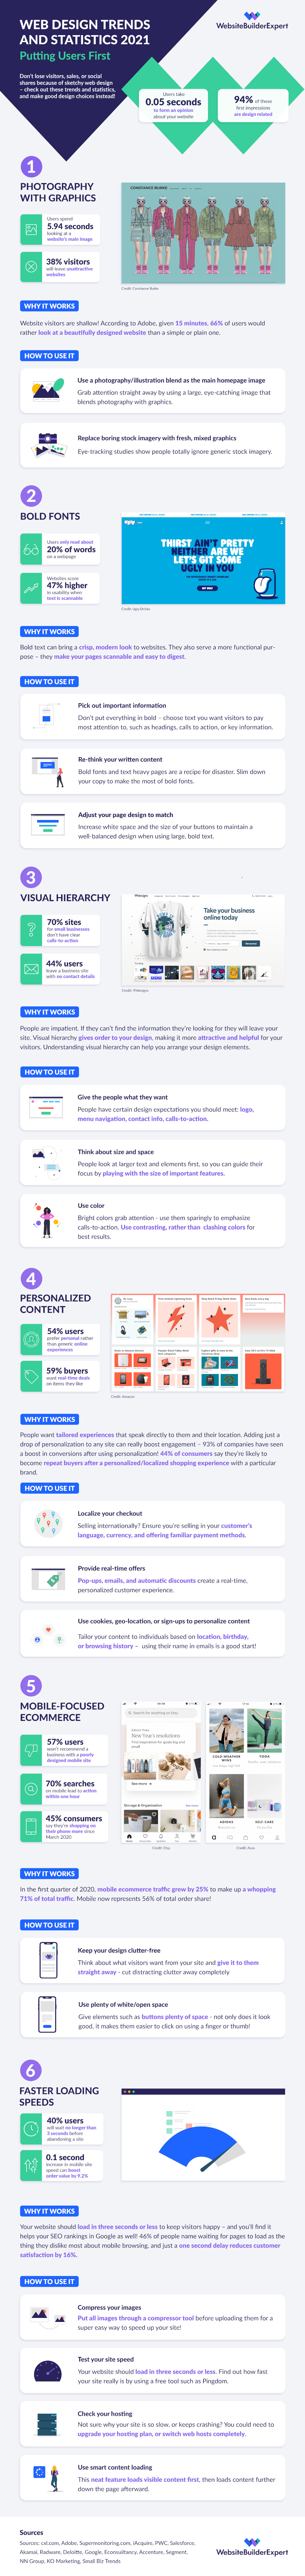 Web design trends and stats infographic